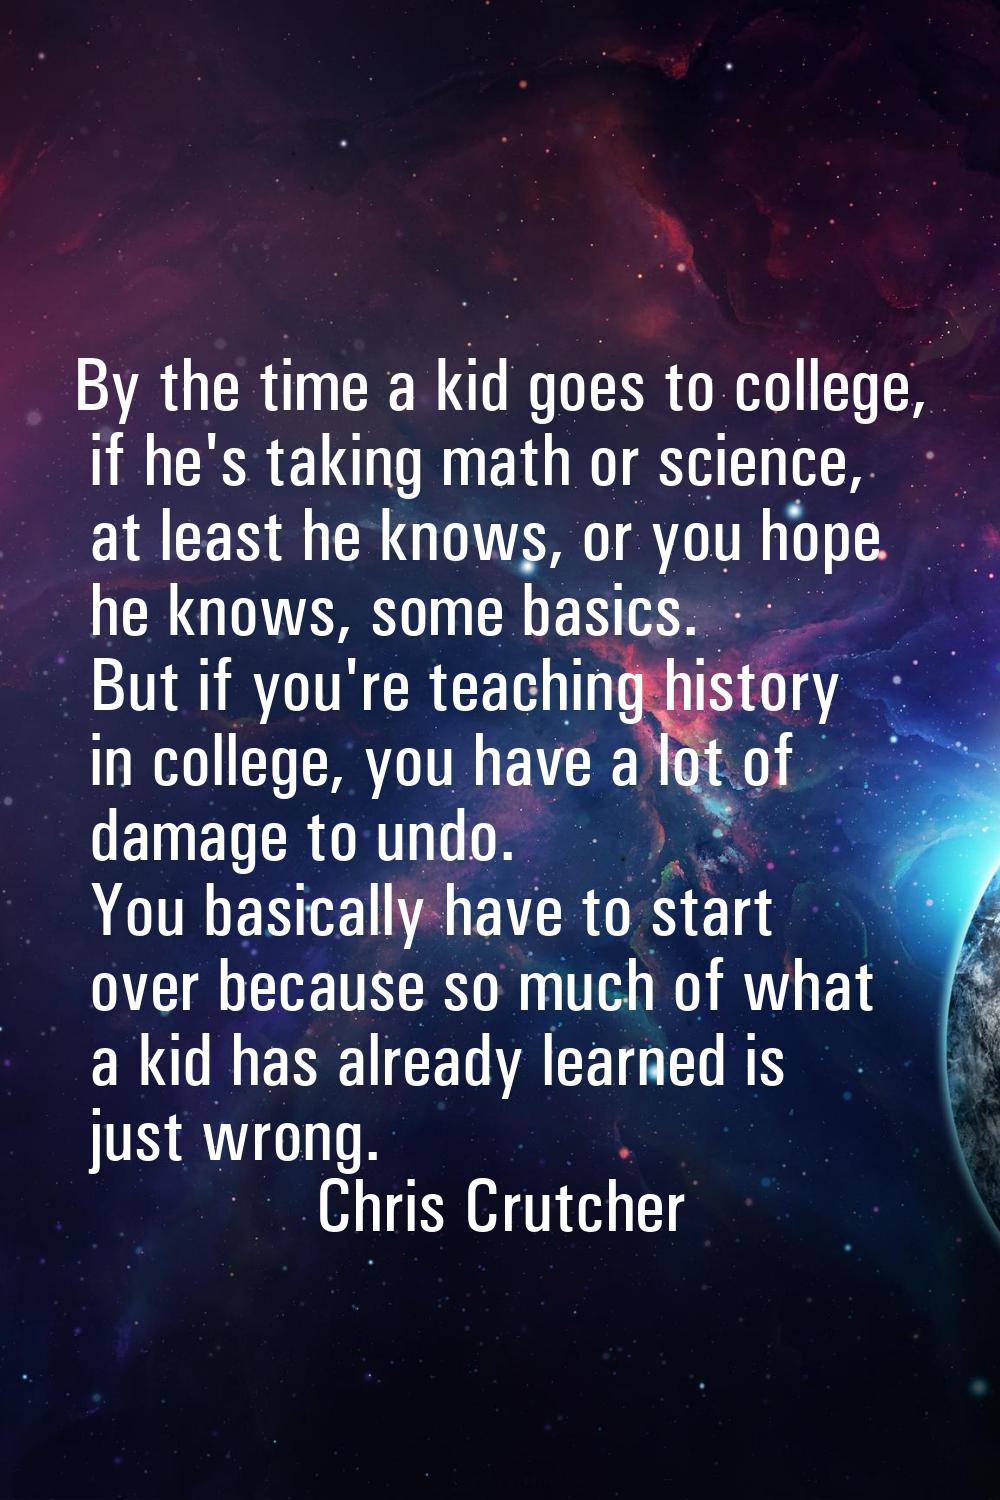 By the time a kid goes to college, if he's taking math or science, at least he knows, or you hope h